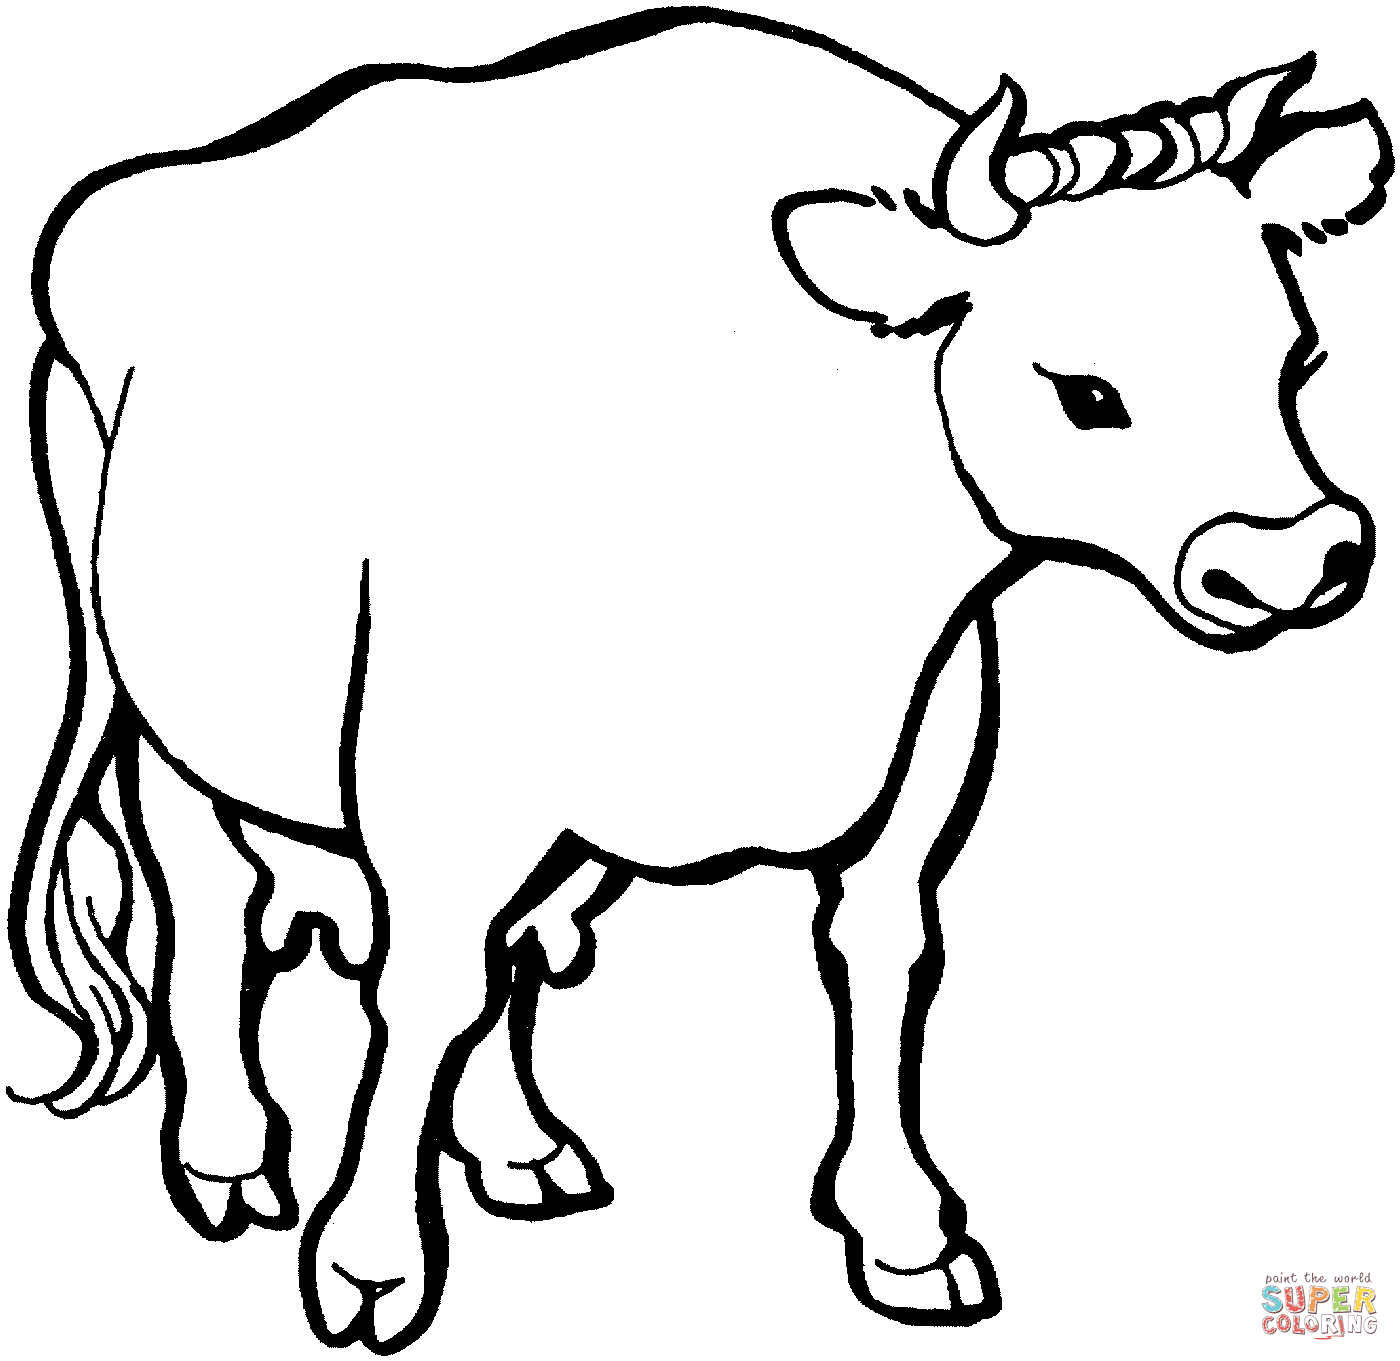 Cow 1 coloring page | Free Printable Coloring Pages - ClipArt Best ...